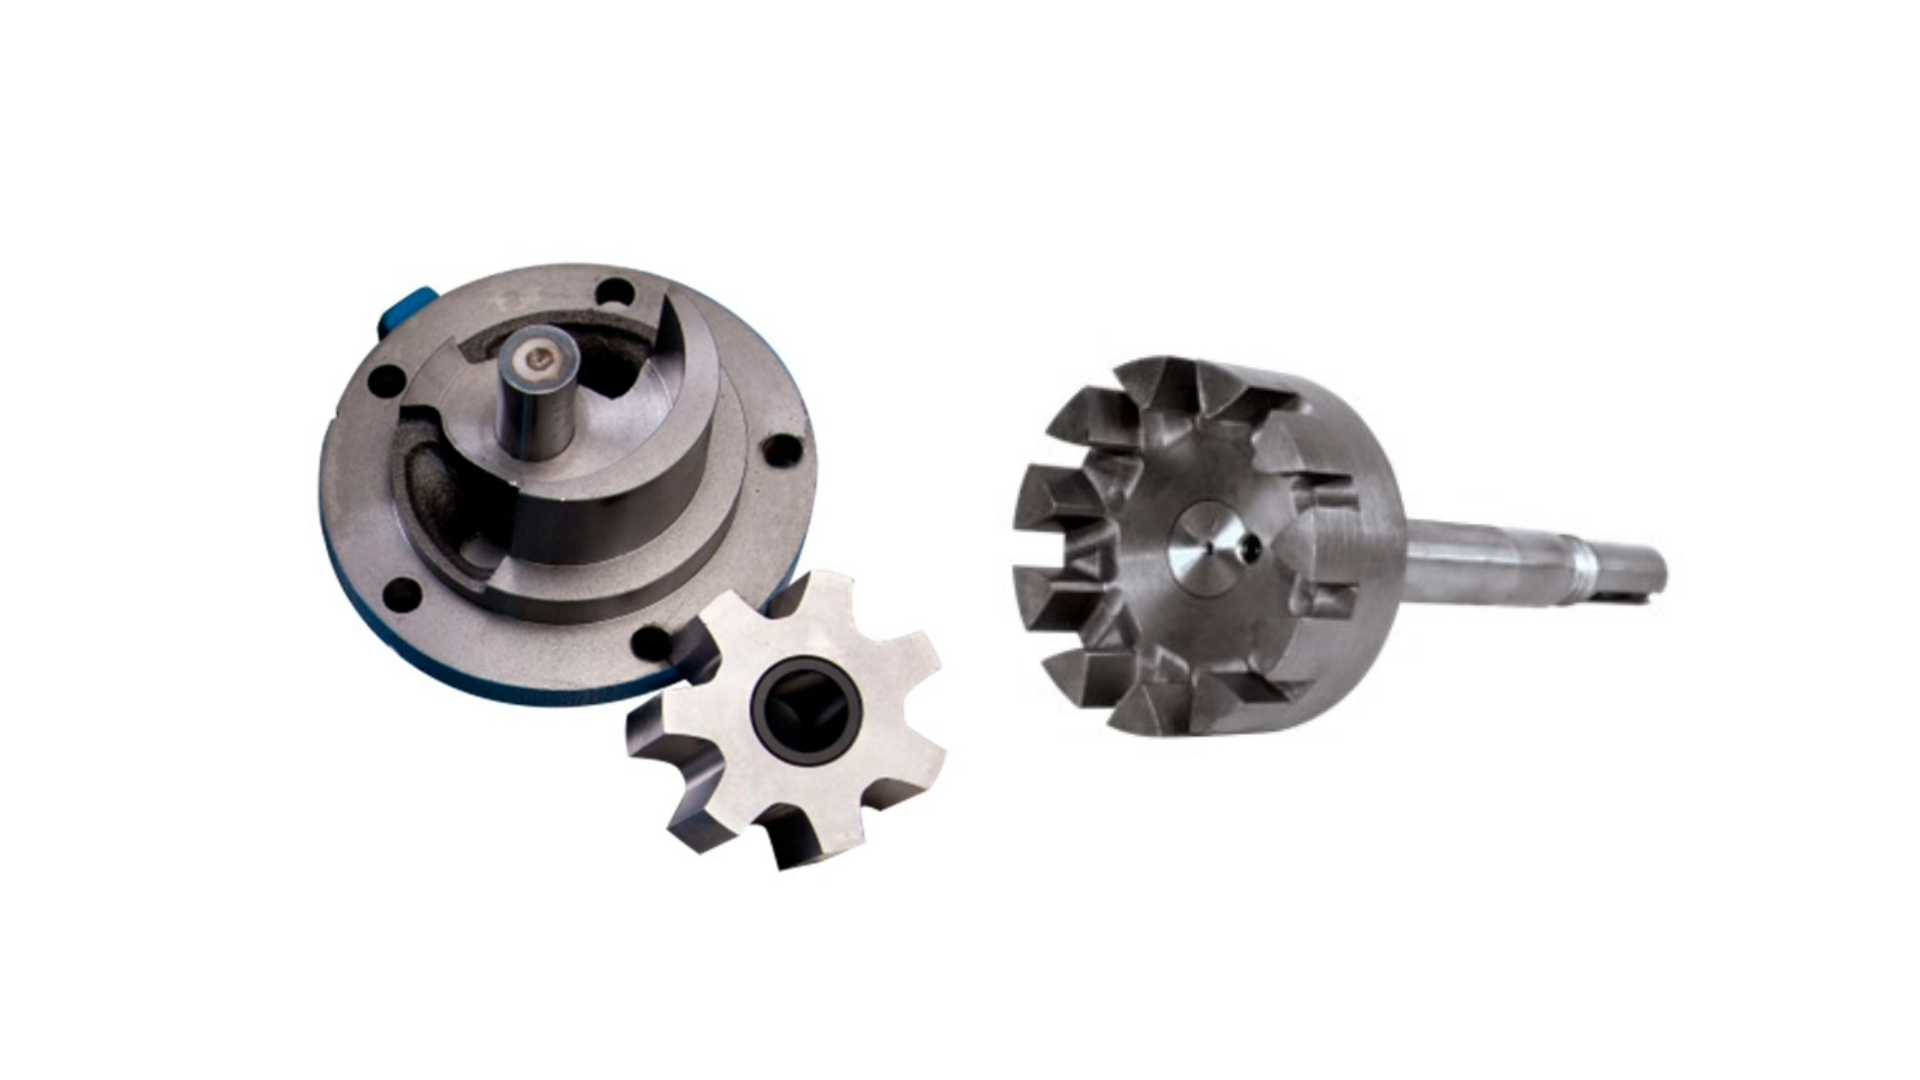 Left: Internal Gear Pump head showing idler pin and crescent, along with an idler gear showing black sleeve bearing (bushing) in the bore. Right: Rotor/shaft assembly